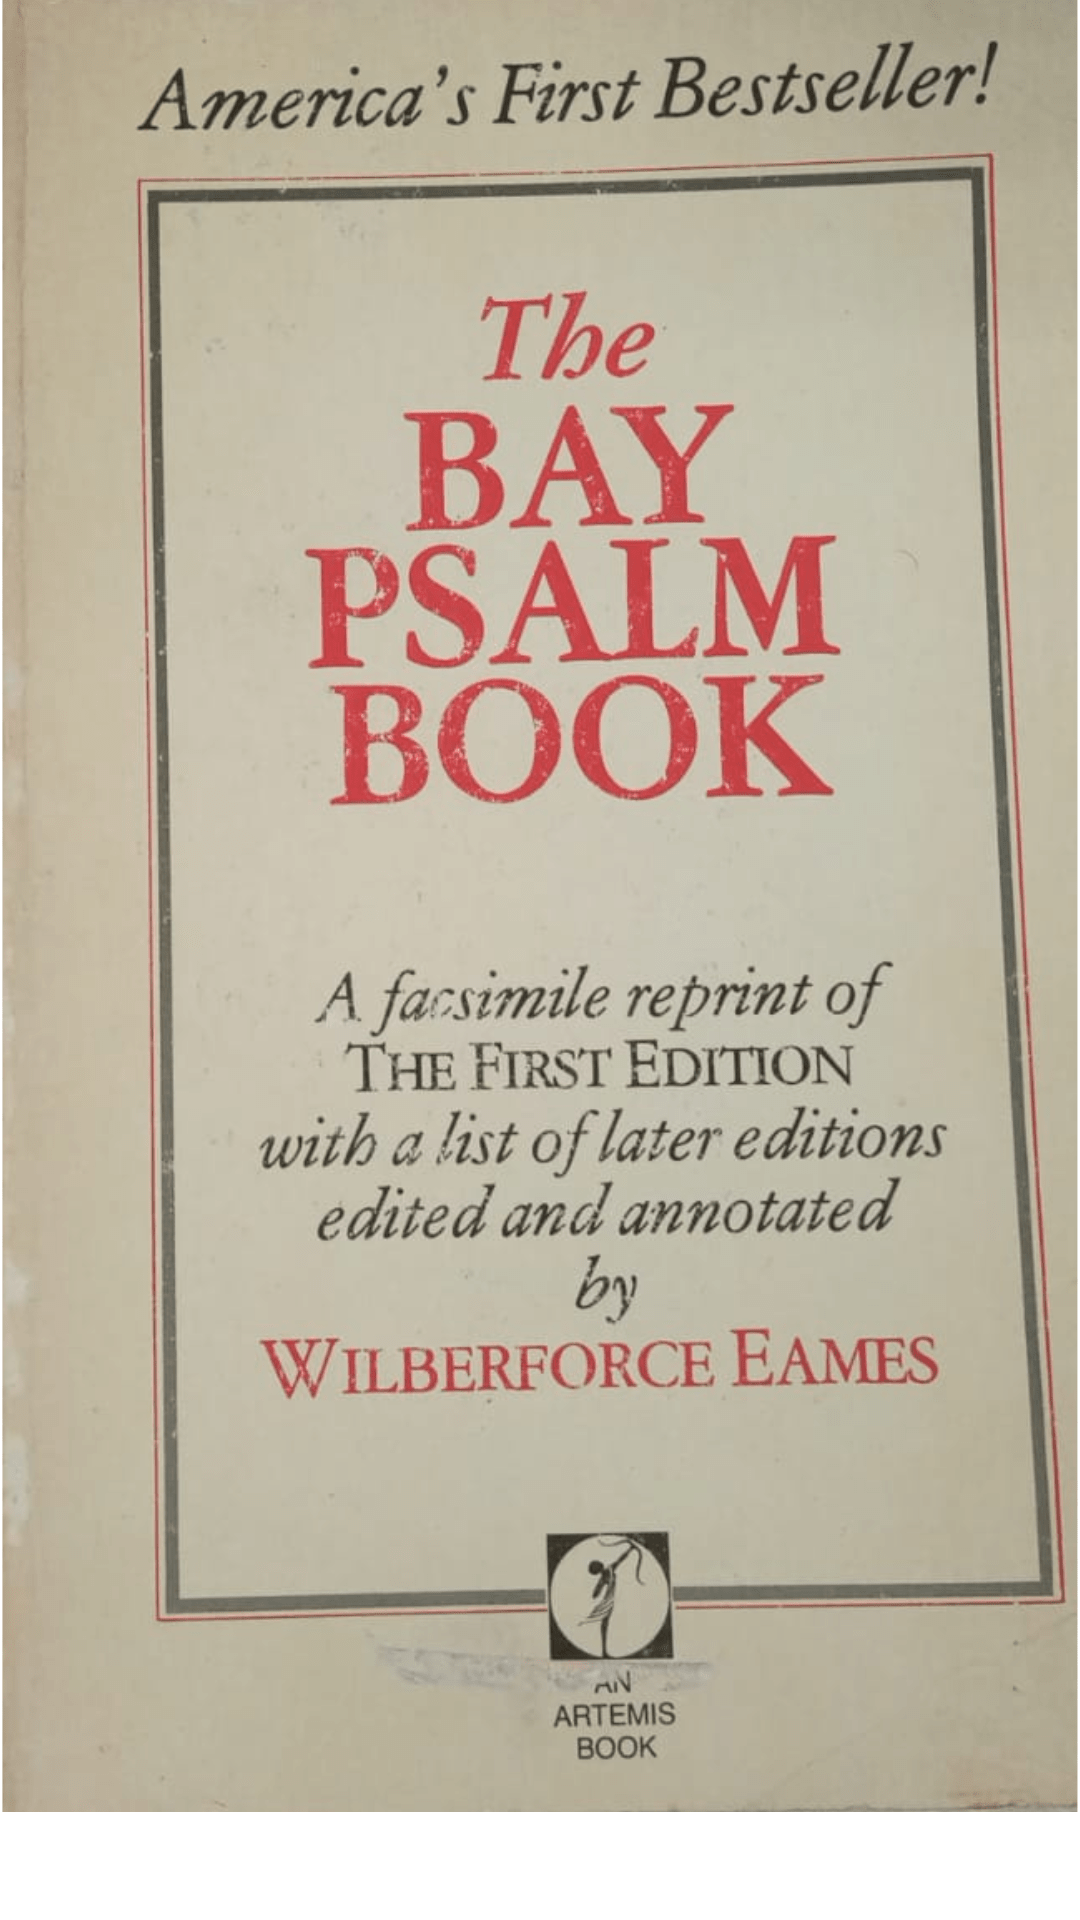 The Bay Psalm Book by Wilberforce Eames